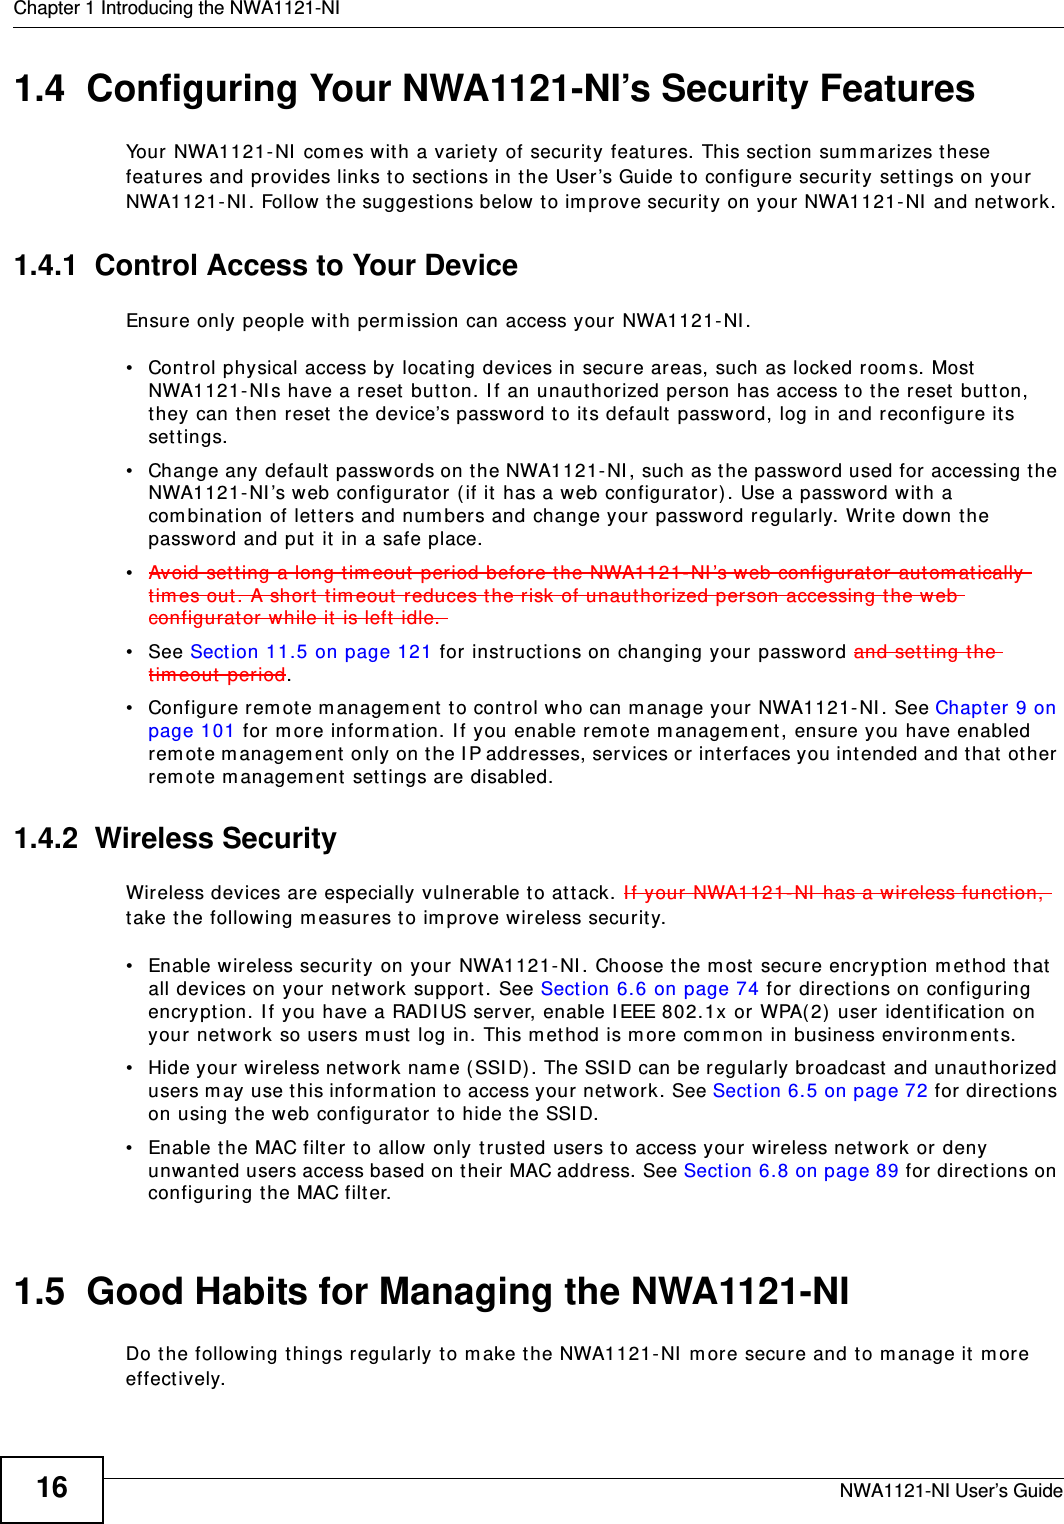 Chapter 1 Introducing the NWA1121-NINWA1121-NI User’s Guide161.4  Configuring Your NWA1121-NI’s Security FeaturesYour NWA1121-NI comes with a variety of security features. This section summarizes these features and provides links to sections in the User’s Guide to configure security settings on your NWA1121-NI. Follow the suggestions below to improve security on your NWA1121-NI and network. 1.4.1  Control Access to Your DeviceEnsure only people with permission can access your NWA1121-NI.• Control physical access by locating devices in secure areas, such as locked rooms. Most NWA1121-NIs have a reset button. If an unauthorized person has access to the reset button, they can then reset the device’s password to its default password, log in and reconfigure its settings.• Change any default passwords on the NWA1121-NI, such as the password used for accessing the NWA1121-NI’s web configurator (if it has a web configurator). Use a password with a combination of letters and numbers and change your password regularly. Write down the password and put it in a safe place.•Avoid setting a long timeout period before the NWA1121-NI’s web configurator automatically times out. A short timeout reduces the risk of unauthorized person accessing the web configurator while it is left idle. •See Section 11.5 on page 121 for instructions on changing your password and setting the timeout period.• Configure remote management to control who can manage your NWA1121-NI. See Chapter 9 on page 101 for more information. If you enable remote management, ensure you have enabled remote management only on the IP addresses, services or interfaces you intended and that other remote management settings are disabled.1.4.2  Wireless Security Wireless devices are especially vulnerable to attack. If your NWA1121-NI has a wireless function, take the following measures to improve wireless security.• Enable wireless security on your NWA1121-NI. Choose the most secure encryption method that all devices on your network support. See Section 6.6 on page 74 for directions on configuring encryption. If you have a RADIUS server, enable IEEE 802.1x or WPA(2) user identification on your network so users must log in. This method is more common in business environments.   • Hide your wireless network name (SSID). The SSID can be regularly broadcast and unauthorized users may use this information to access your network. See Section 6.5 on page 72 for directions on using the web configurator to hide the SSID. • Enable the MAC filter to allow only trusted users to access your wireless network or deny unwanted users access based on their MAC address. See Section 6.8 on page 89 for directions on configuring the MAC filter. 1.5  Good Habits for Managing the NWA1121-NIDo the following things regularly to make the NWA1121-NI more secure and to manage it more effectively.